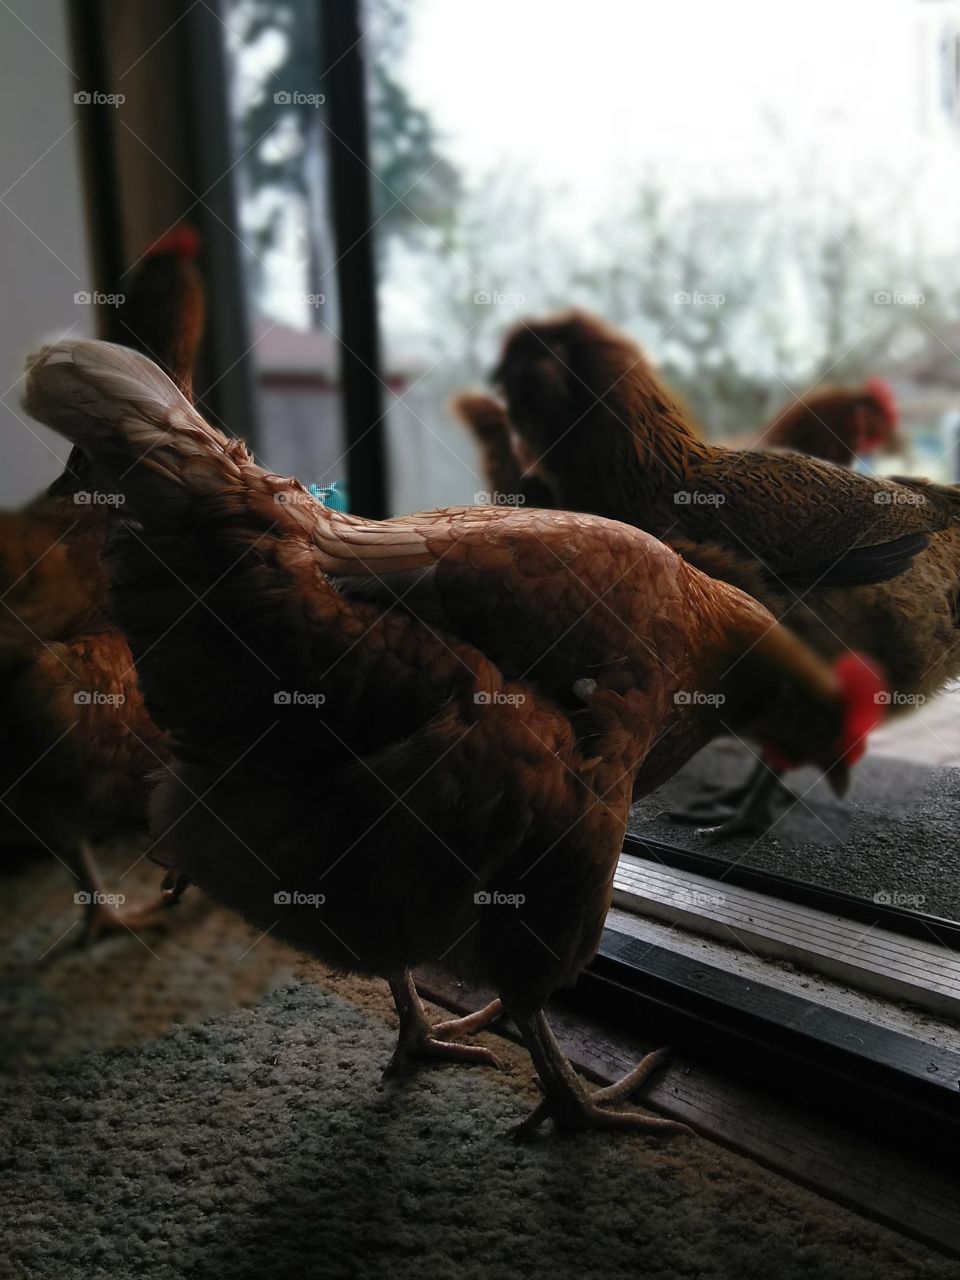 Chickens in the house.